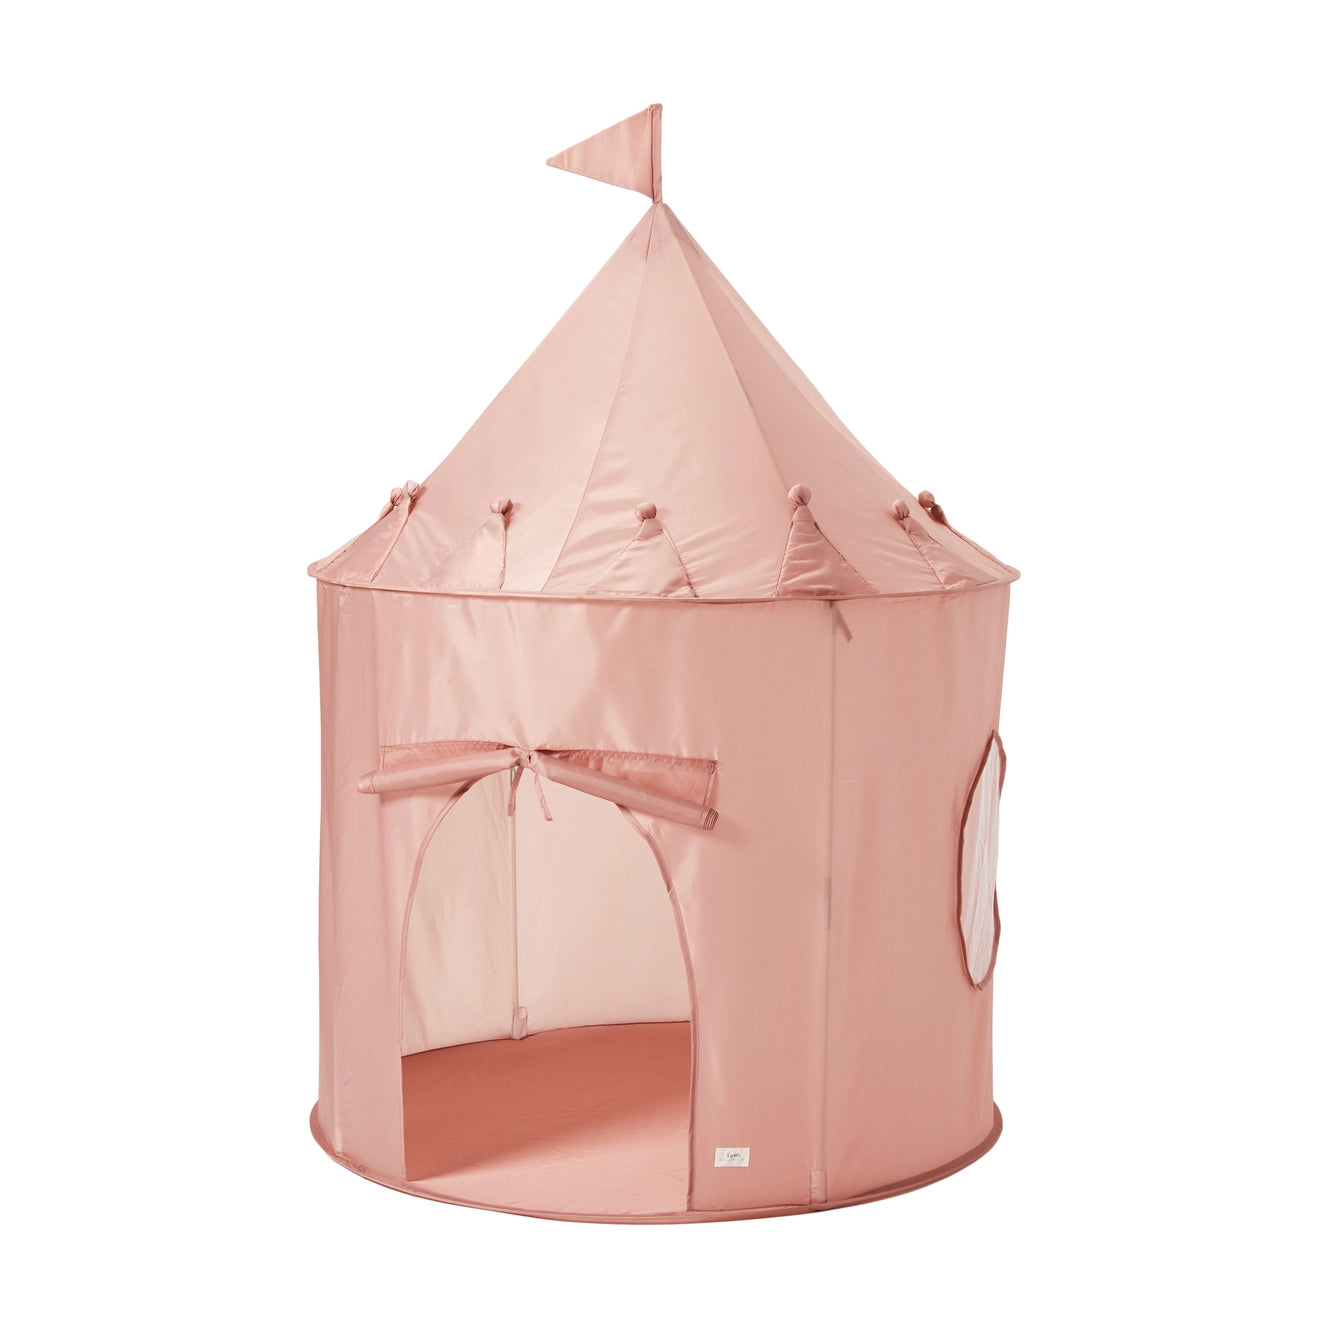 Recycled Fabric Play Tent Castle - Solid Colors